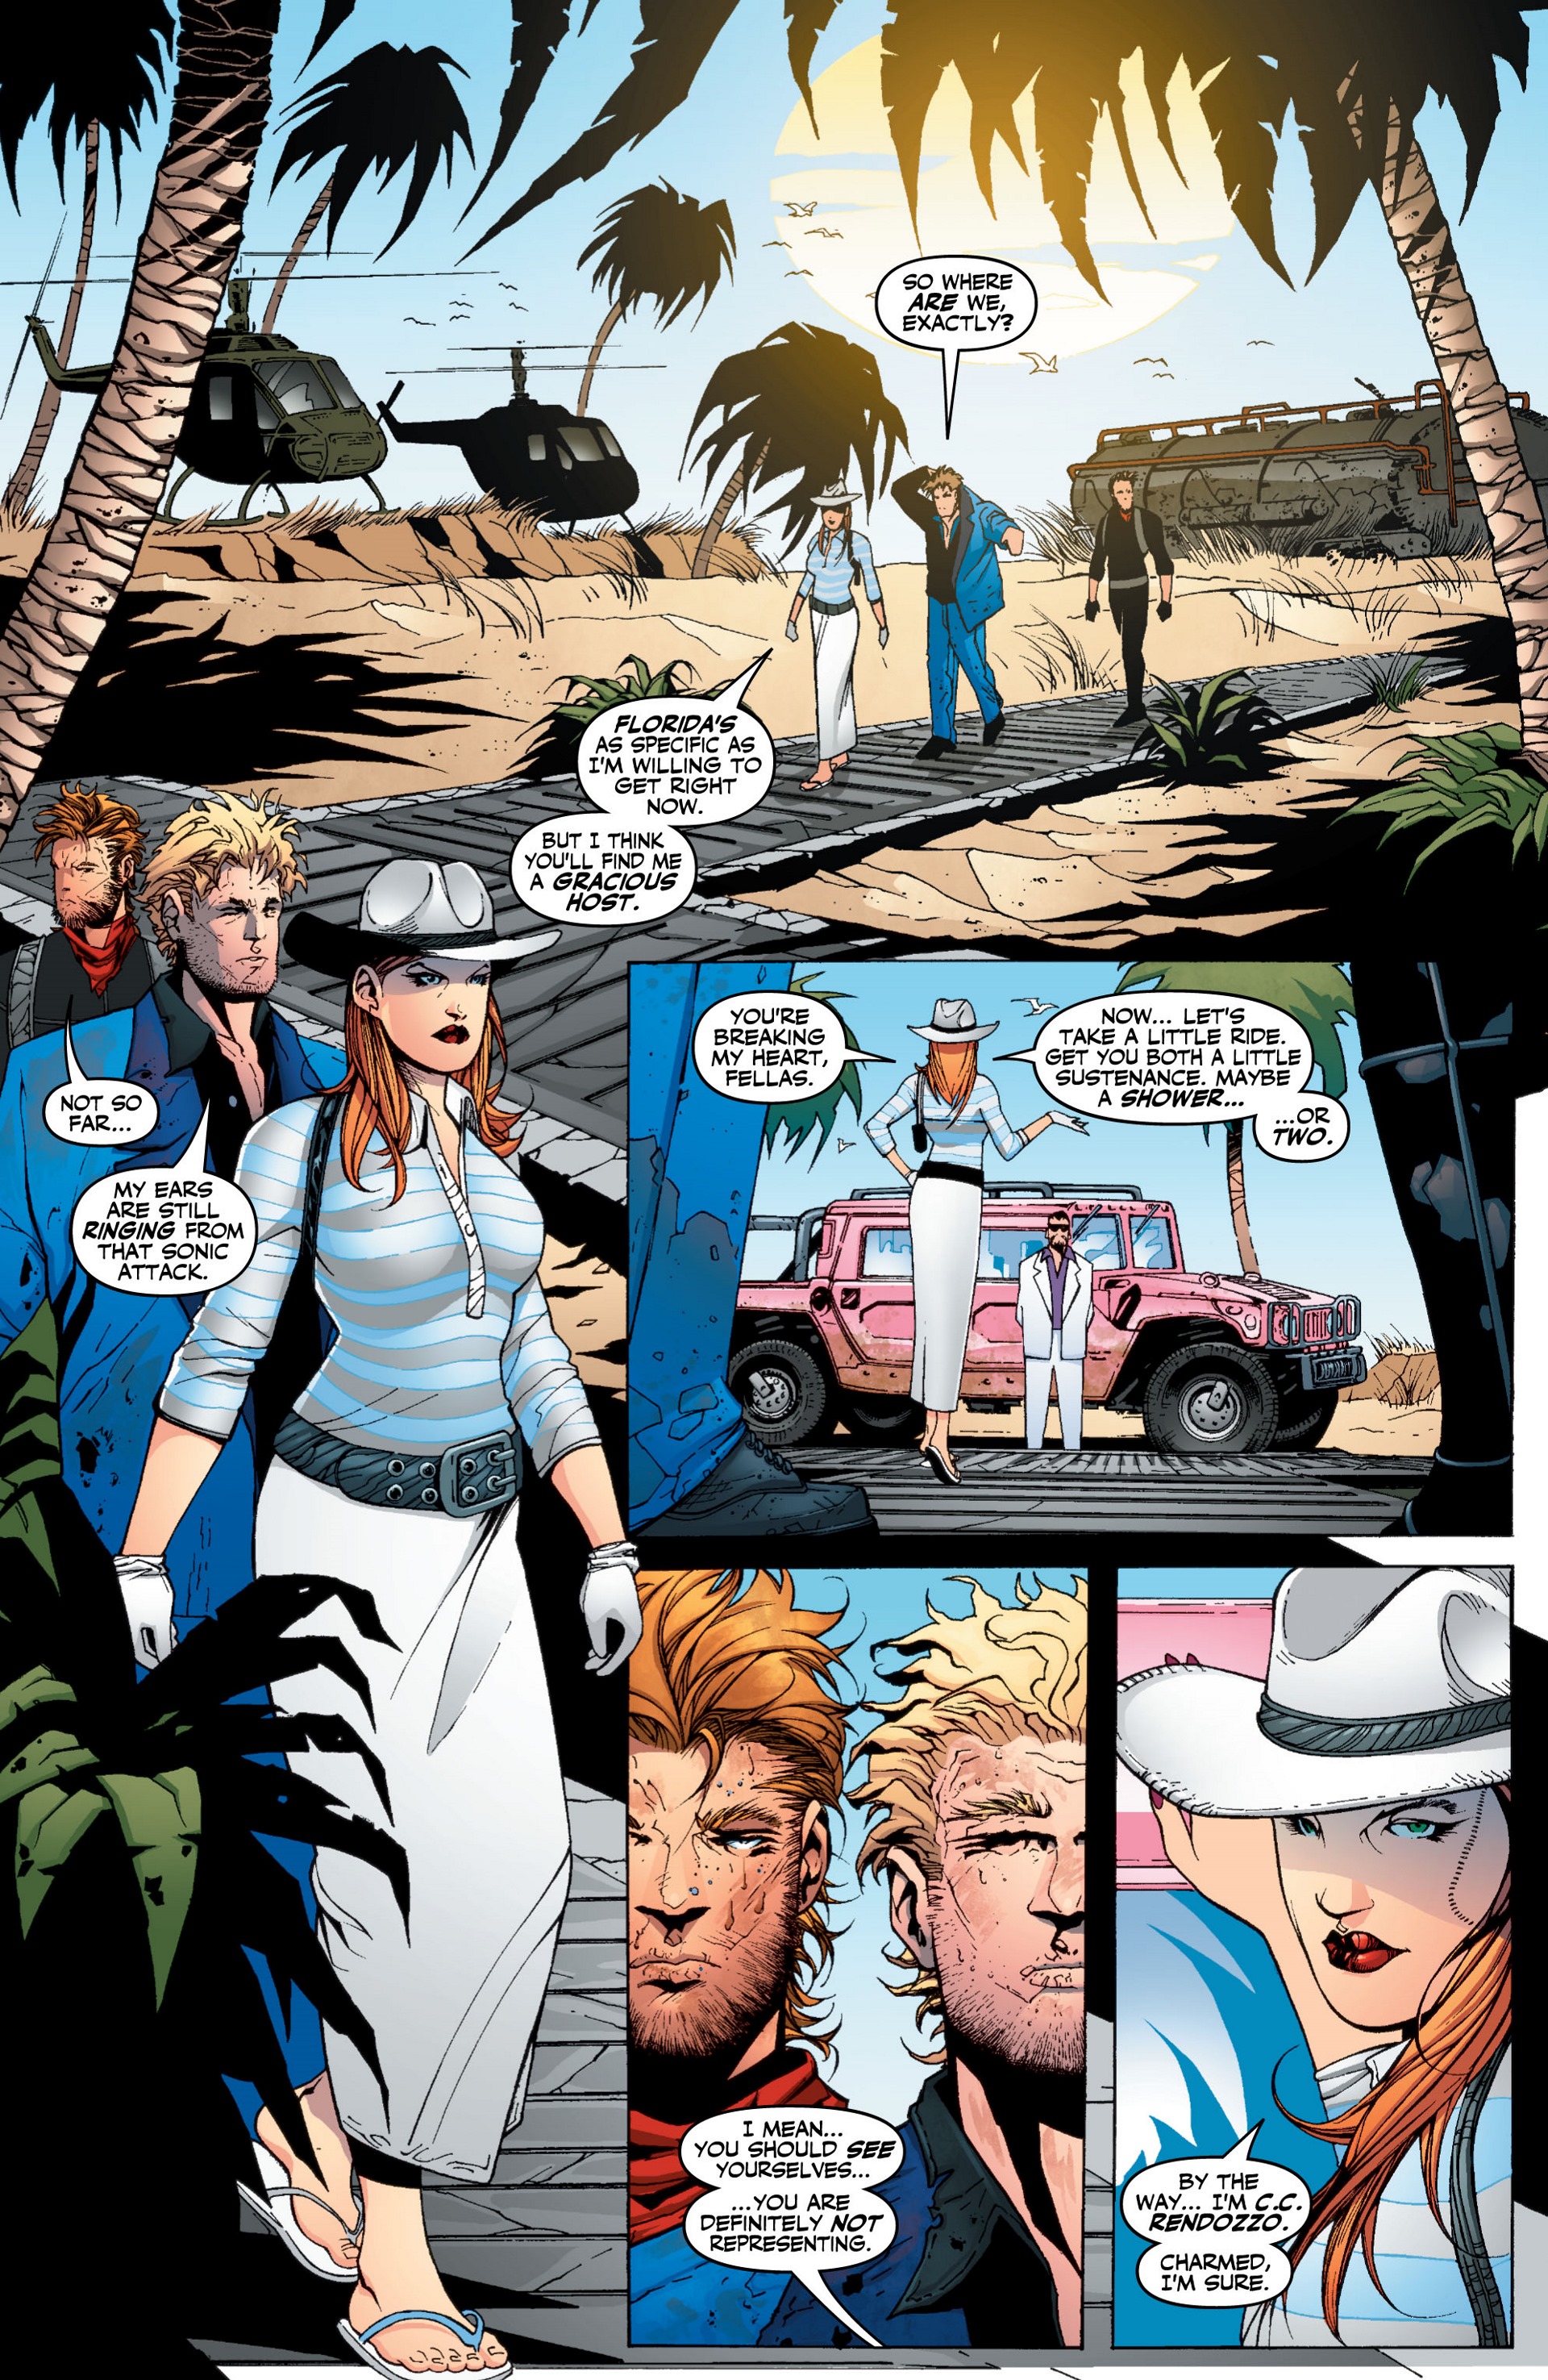 Wildcats Version 3.0 Issue #3 #3 - English 13